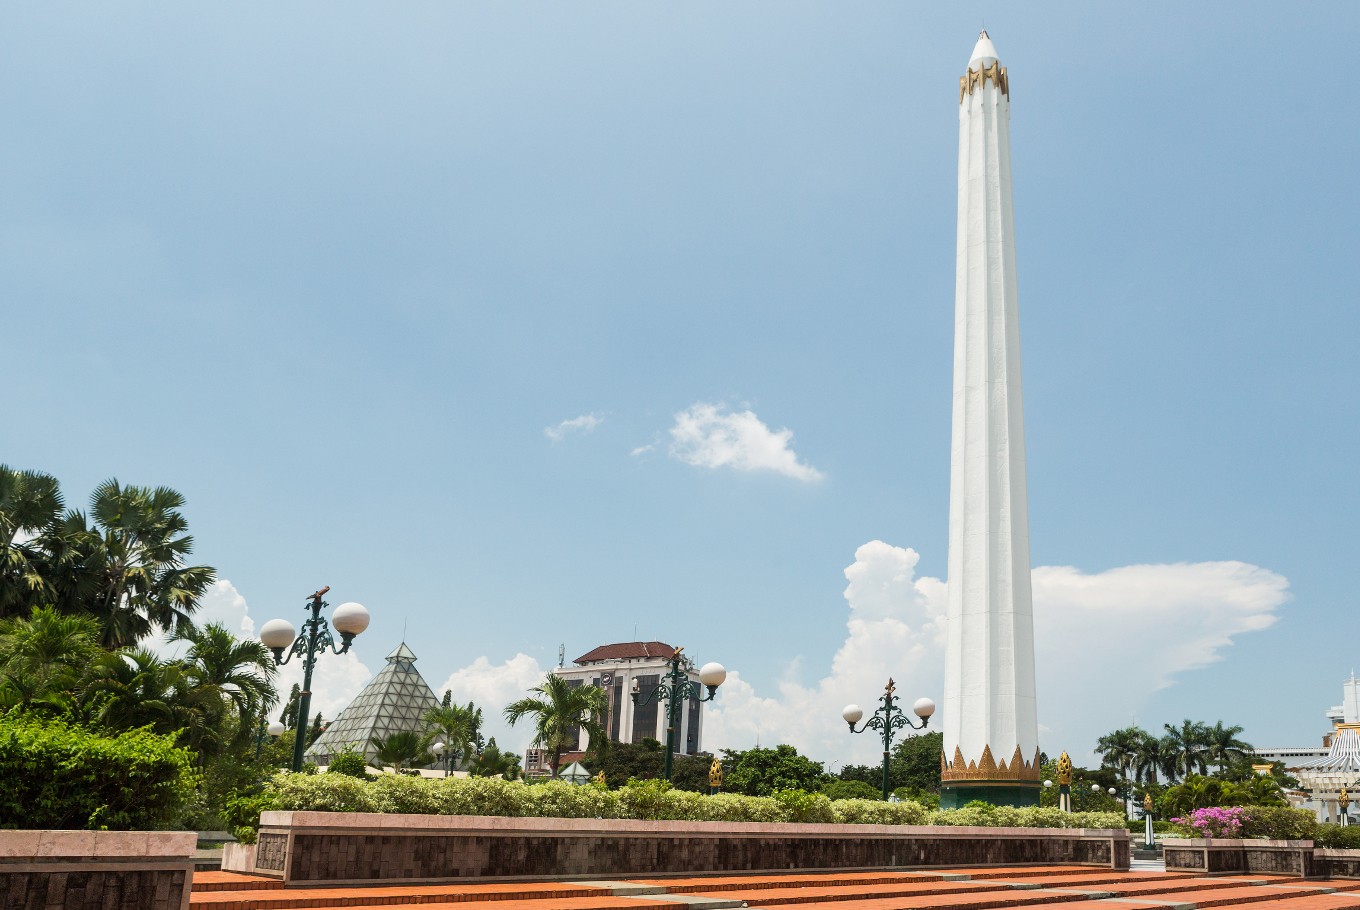 Known as the symbol of the capital city, the Heroes Monument is dedicated to soldiers who passed away during the Battle of Surabaya on November 10, 1945. The East Java capital was named the best tourism city at the 2018 Yokatta Wonderful Indonesia Tourism Awards. (Shutterstock/File)